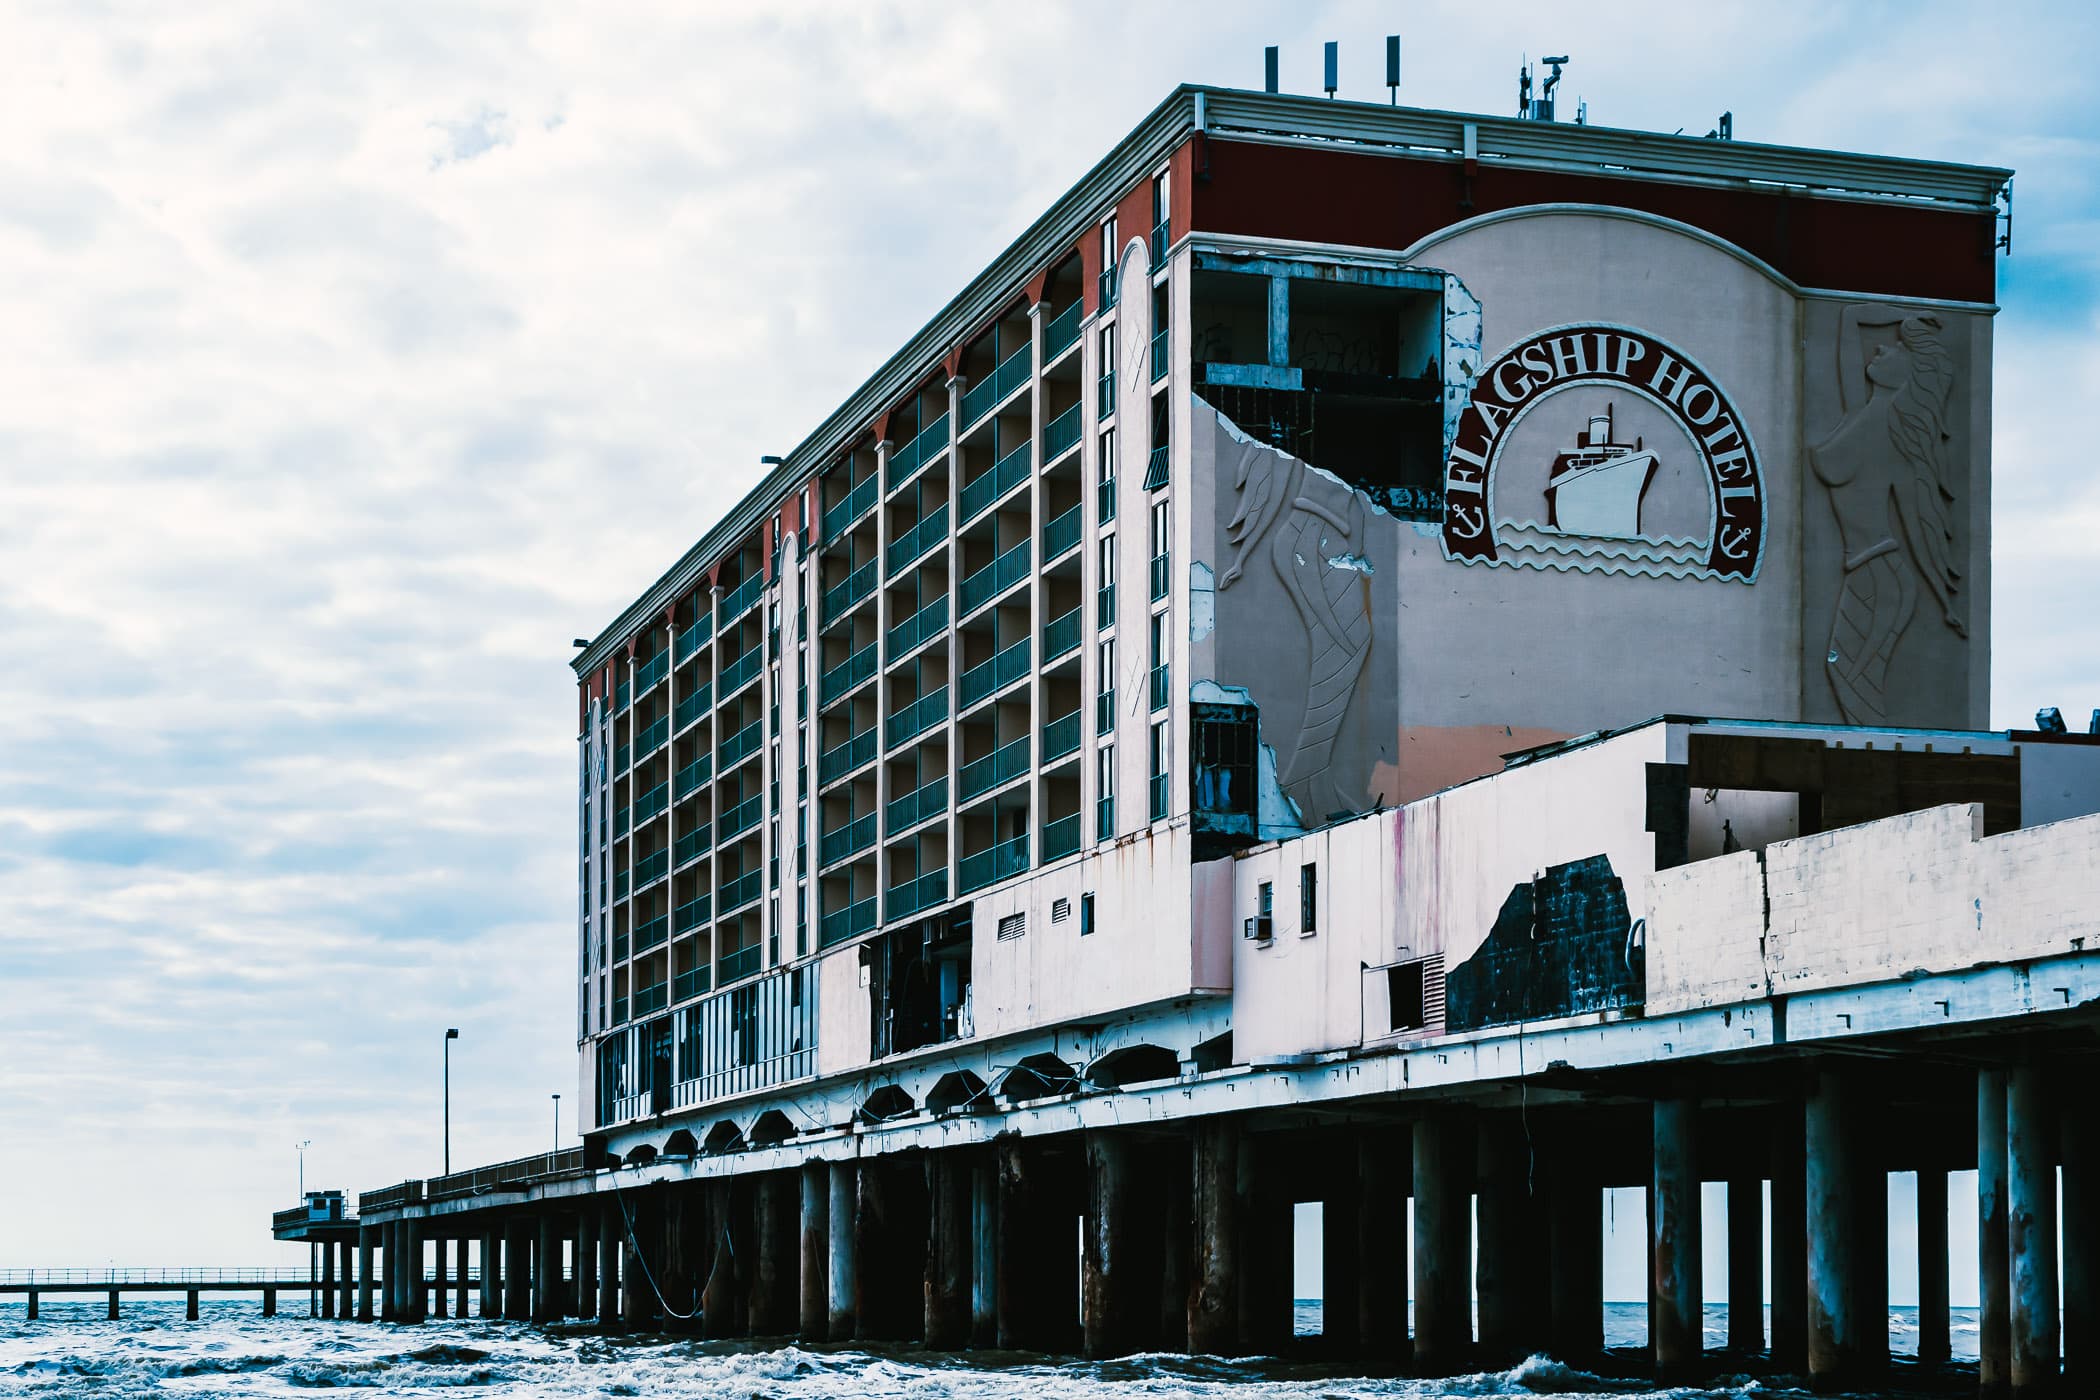 The Flagship Hotel, built on a pier extending from Galveston's Seawall Boulevard out into the Gulf of Mexico, sits damaged and abandoned in the aftermath of Hurricane Ike.